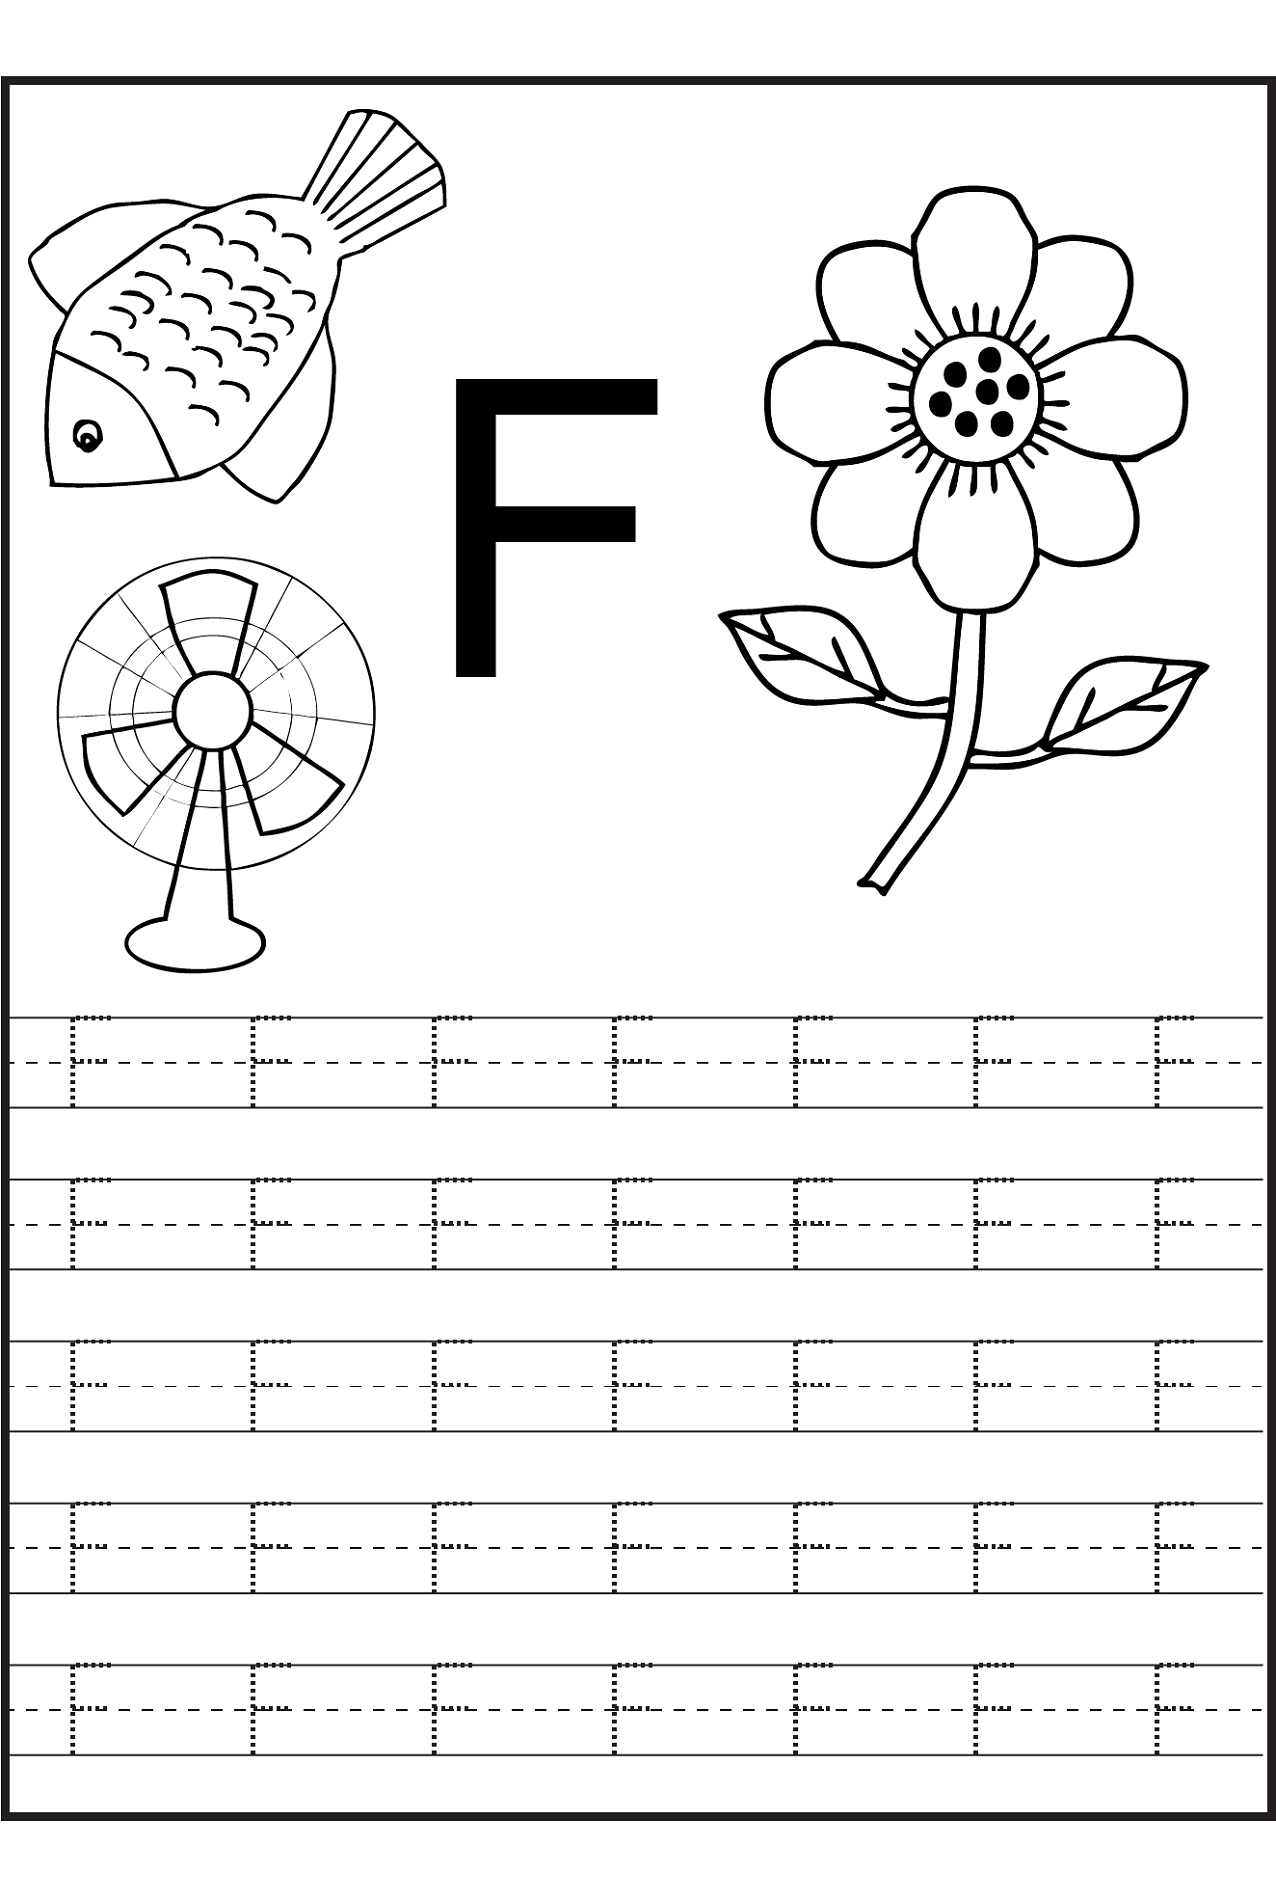 Trace The Letters Worksheets | Alphabet Writing Worksheets intended for Tracing Letter F Worksheets Preschool